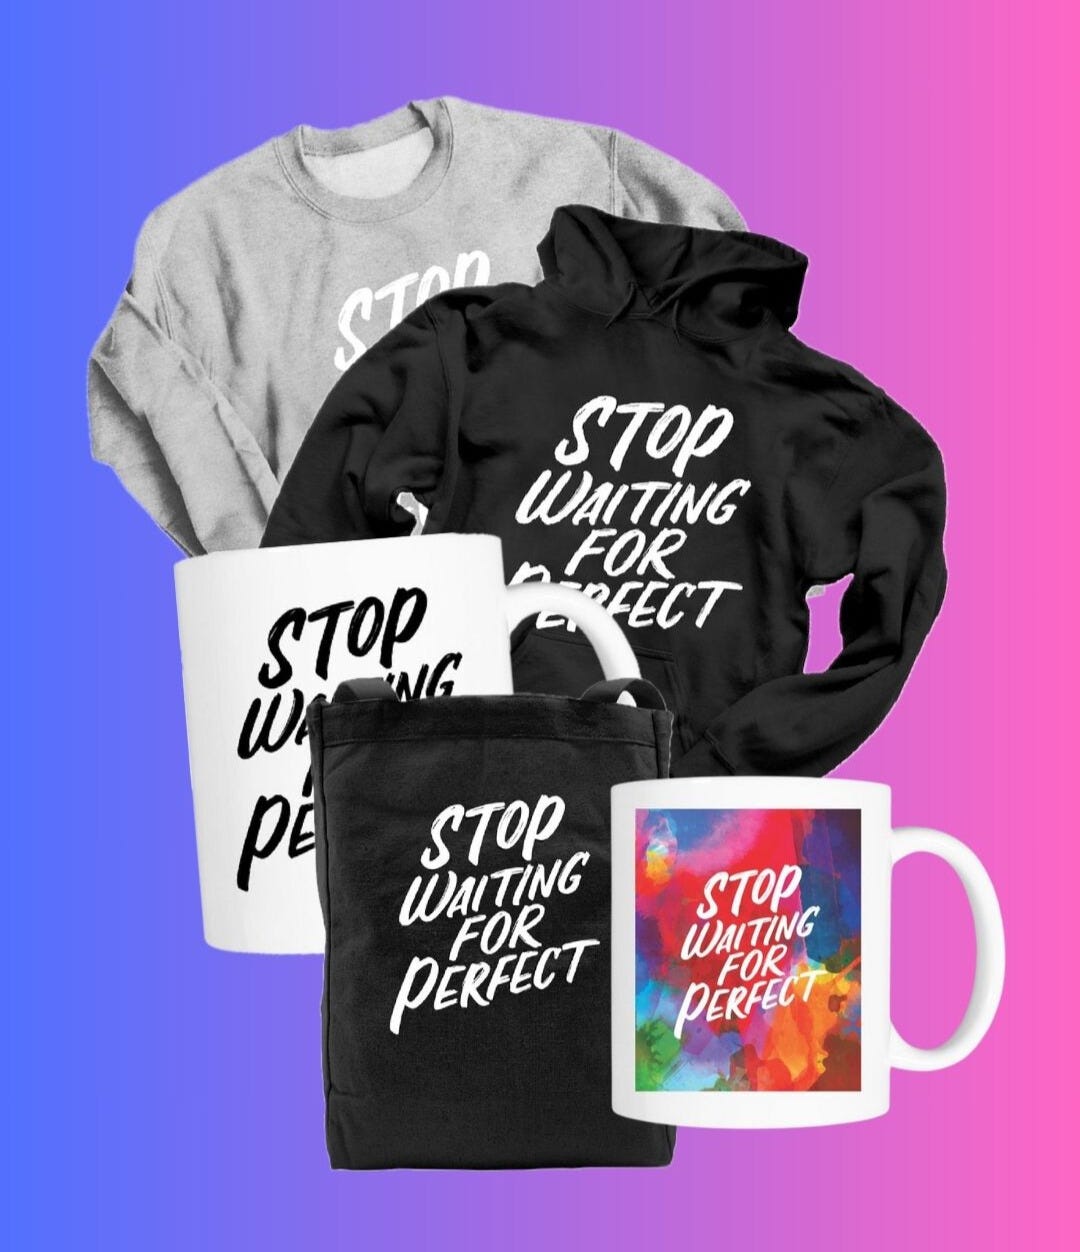 Picture of Stop Waiting for Perfect merchandise, including mugs, tote, and sweatshirts on top of a purple and pink background